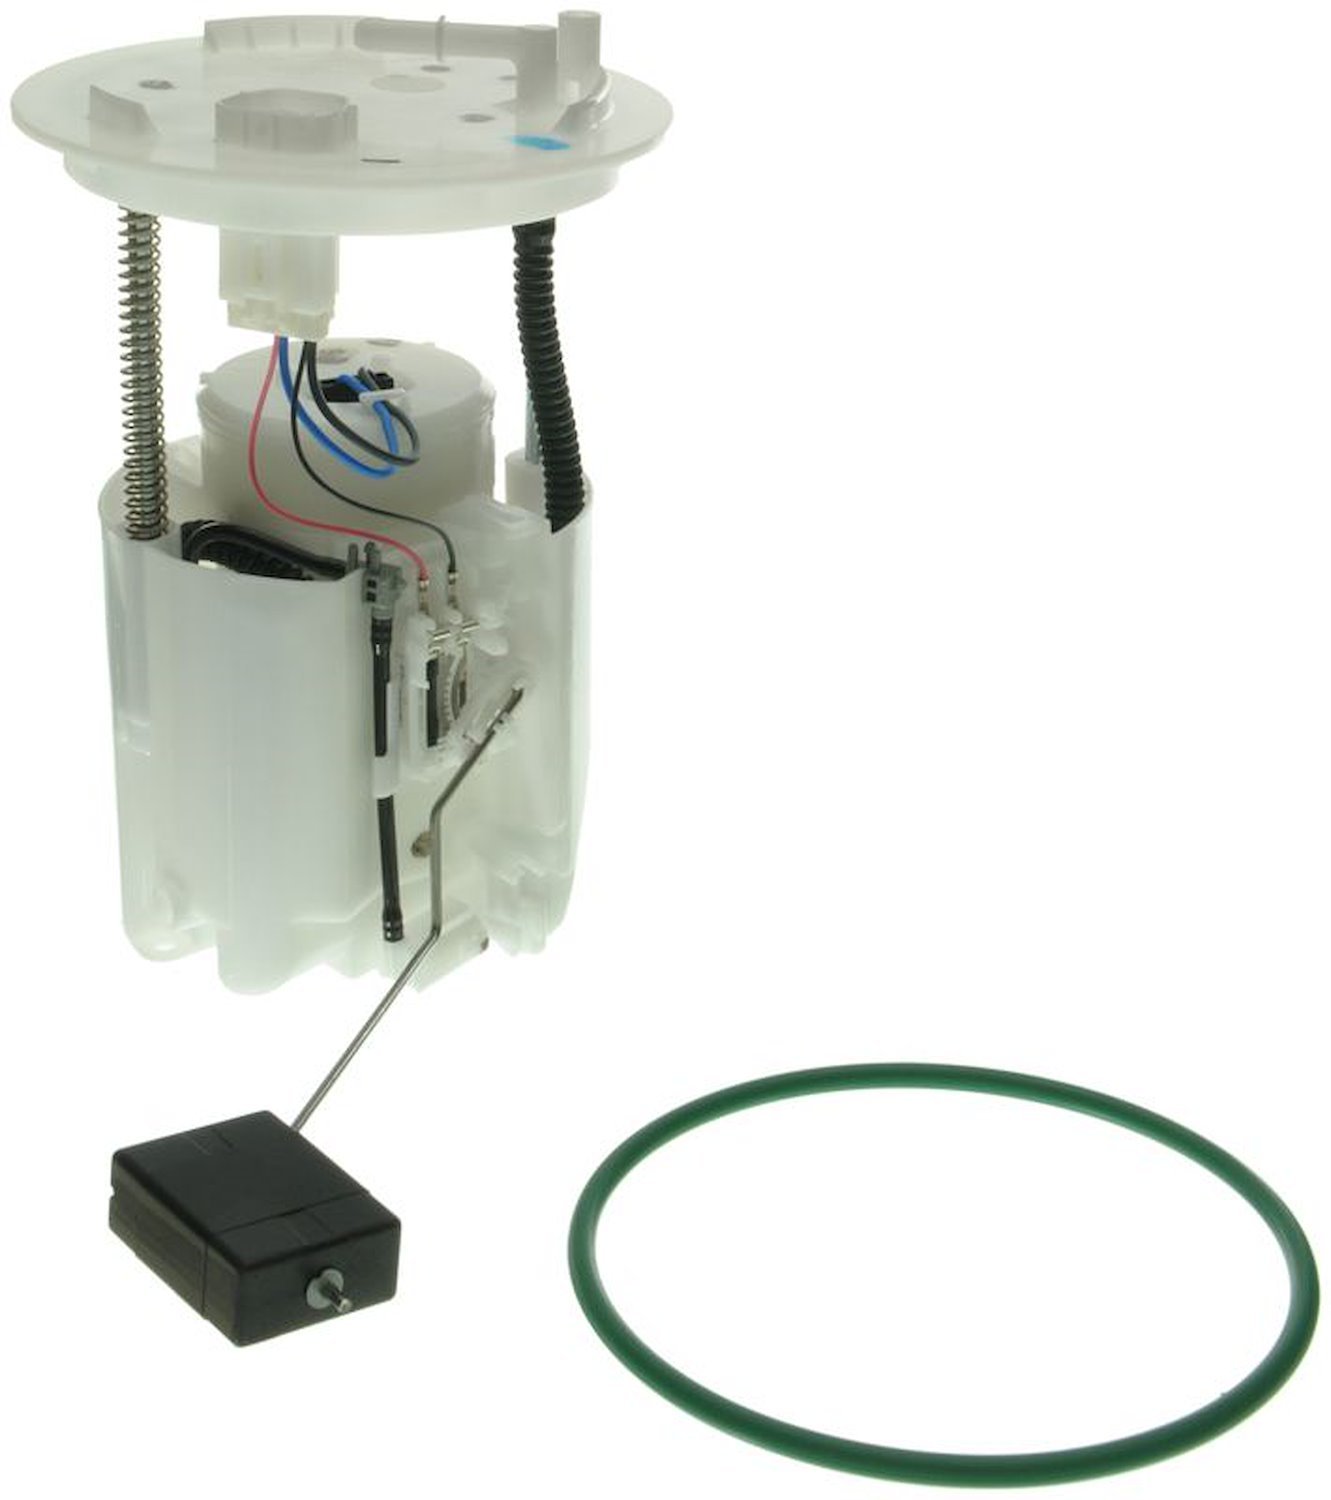 OE Ford Replacement Fuel Pump Module Assembly for 2008-2009 Ford Fusion/Mercury Milan